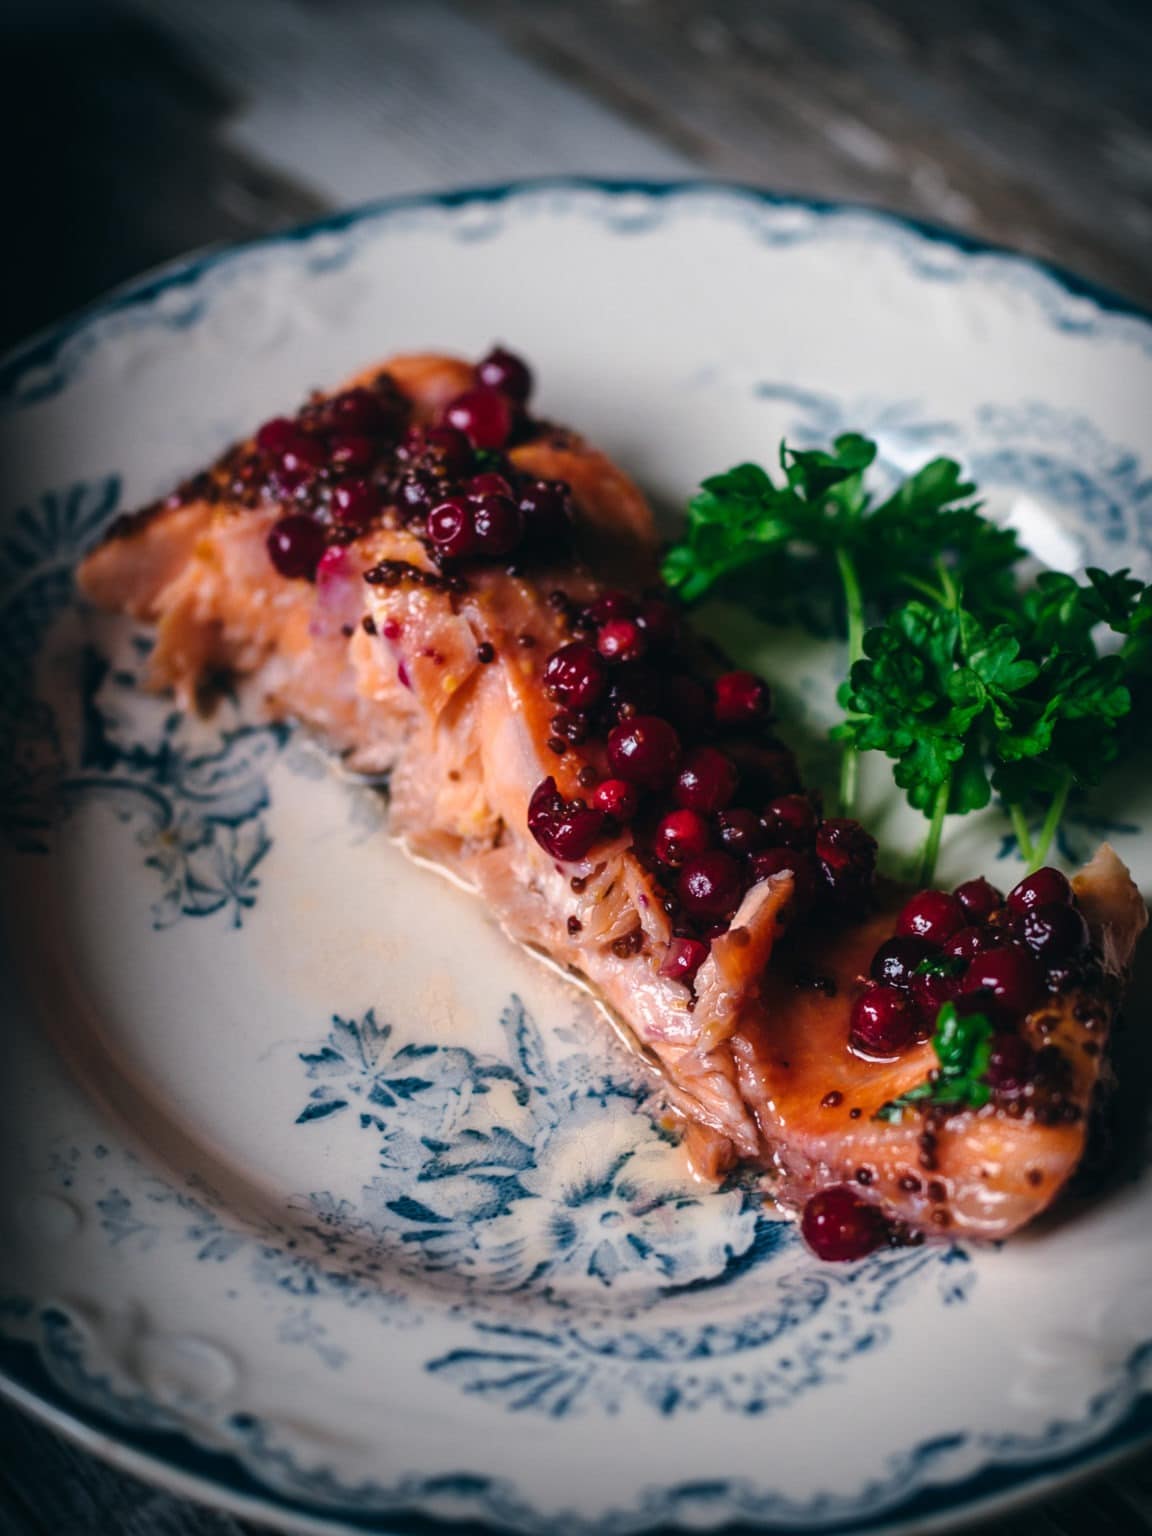 Salmon topped with wild lingonberries and sauce.